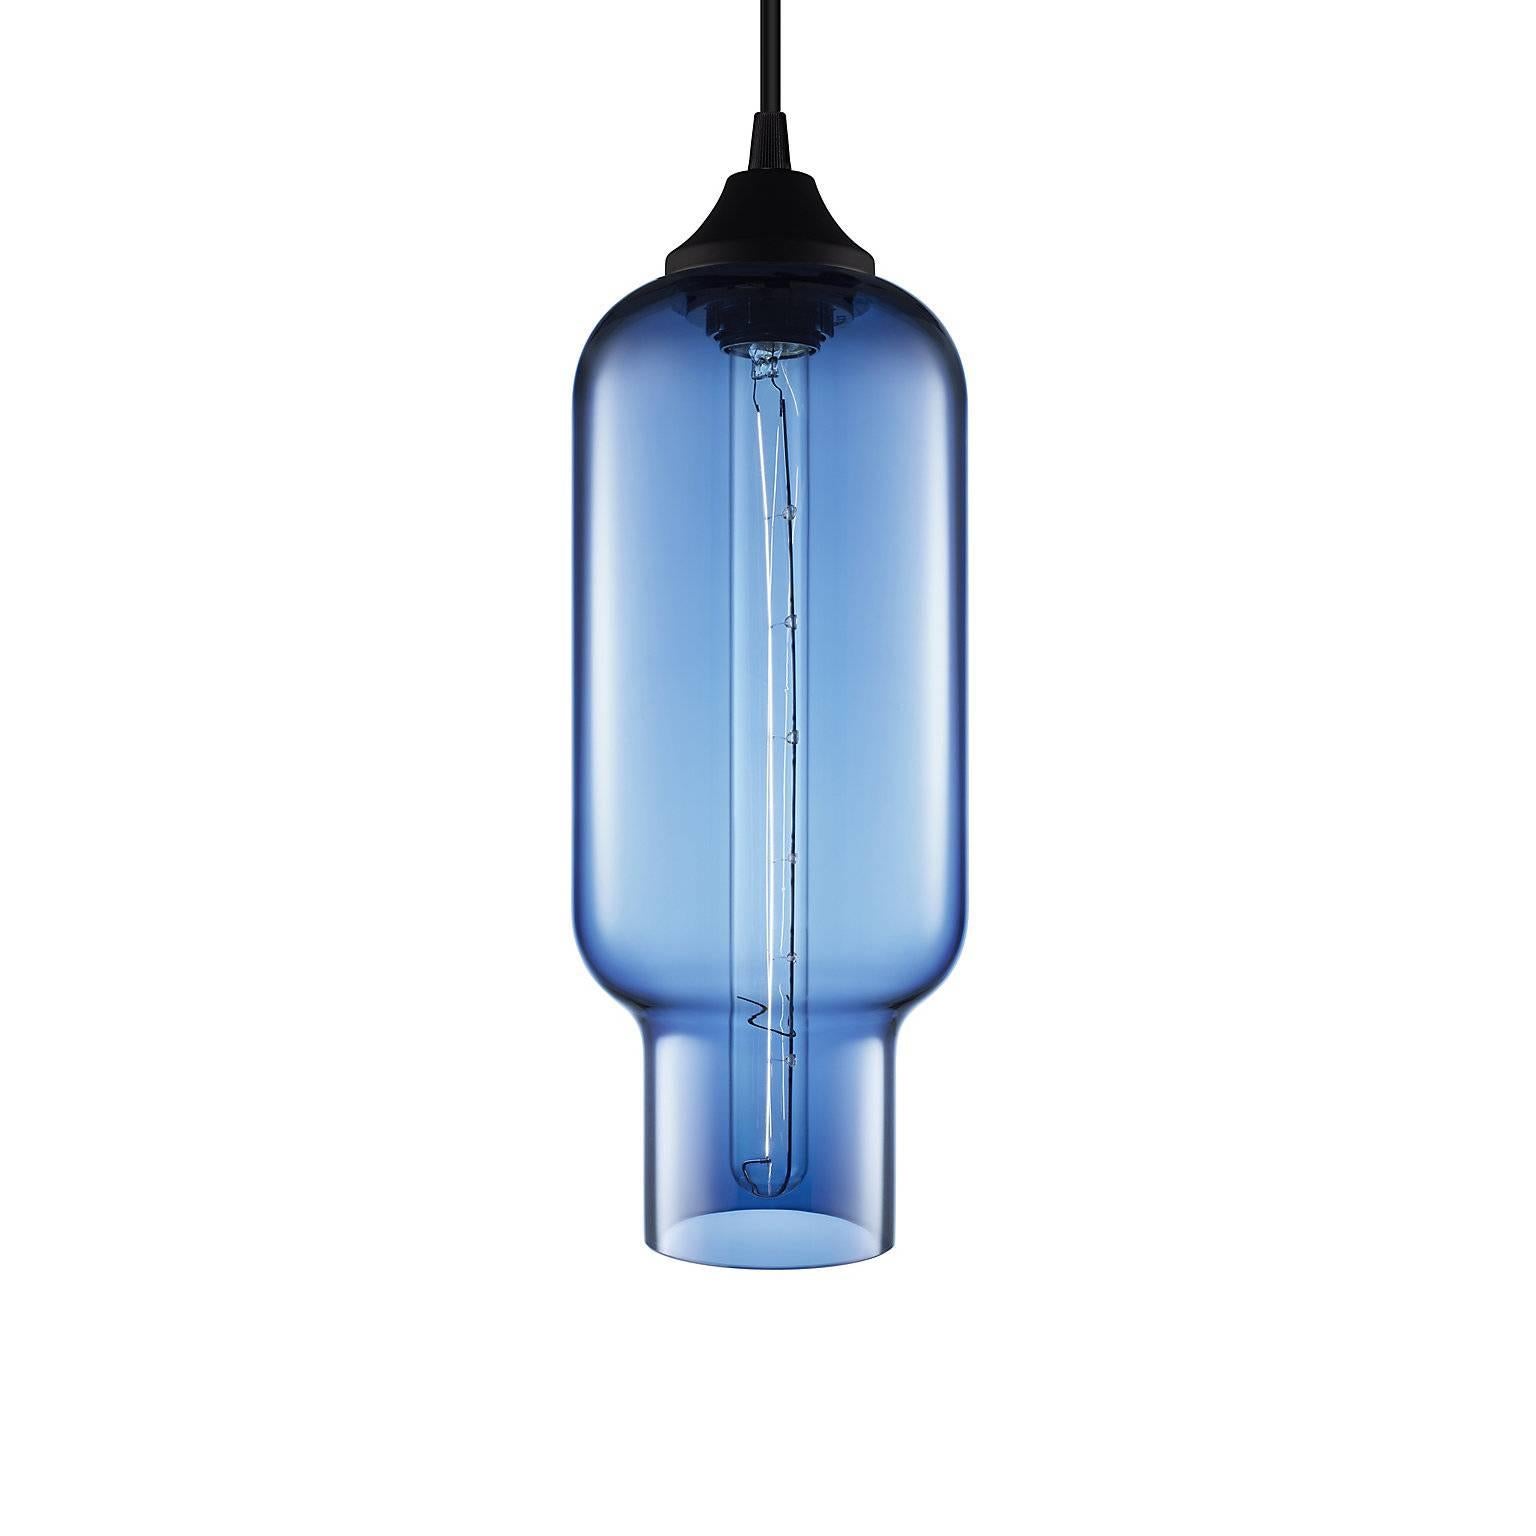 Paying homage to ancient towers of light, the Pharos pendant is sleek enough to stand on its own and simple enough to shine in tightly grouped bouquets. Every single glass pendant light that comes from Niche is hand-blown by real human beings in a